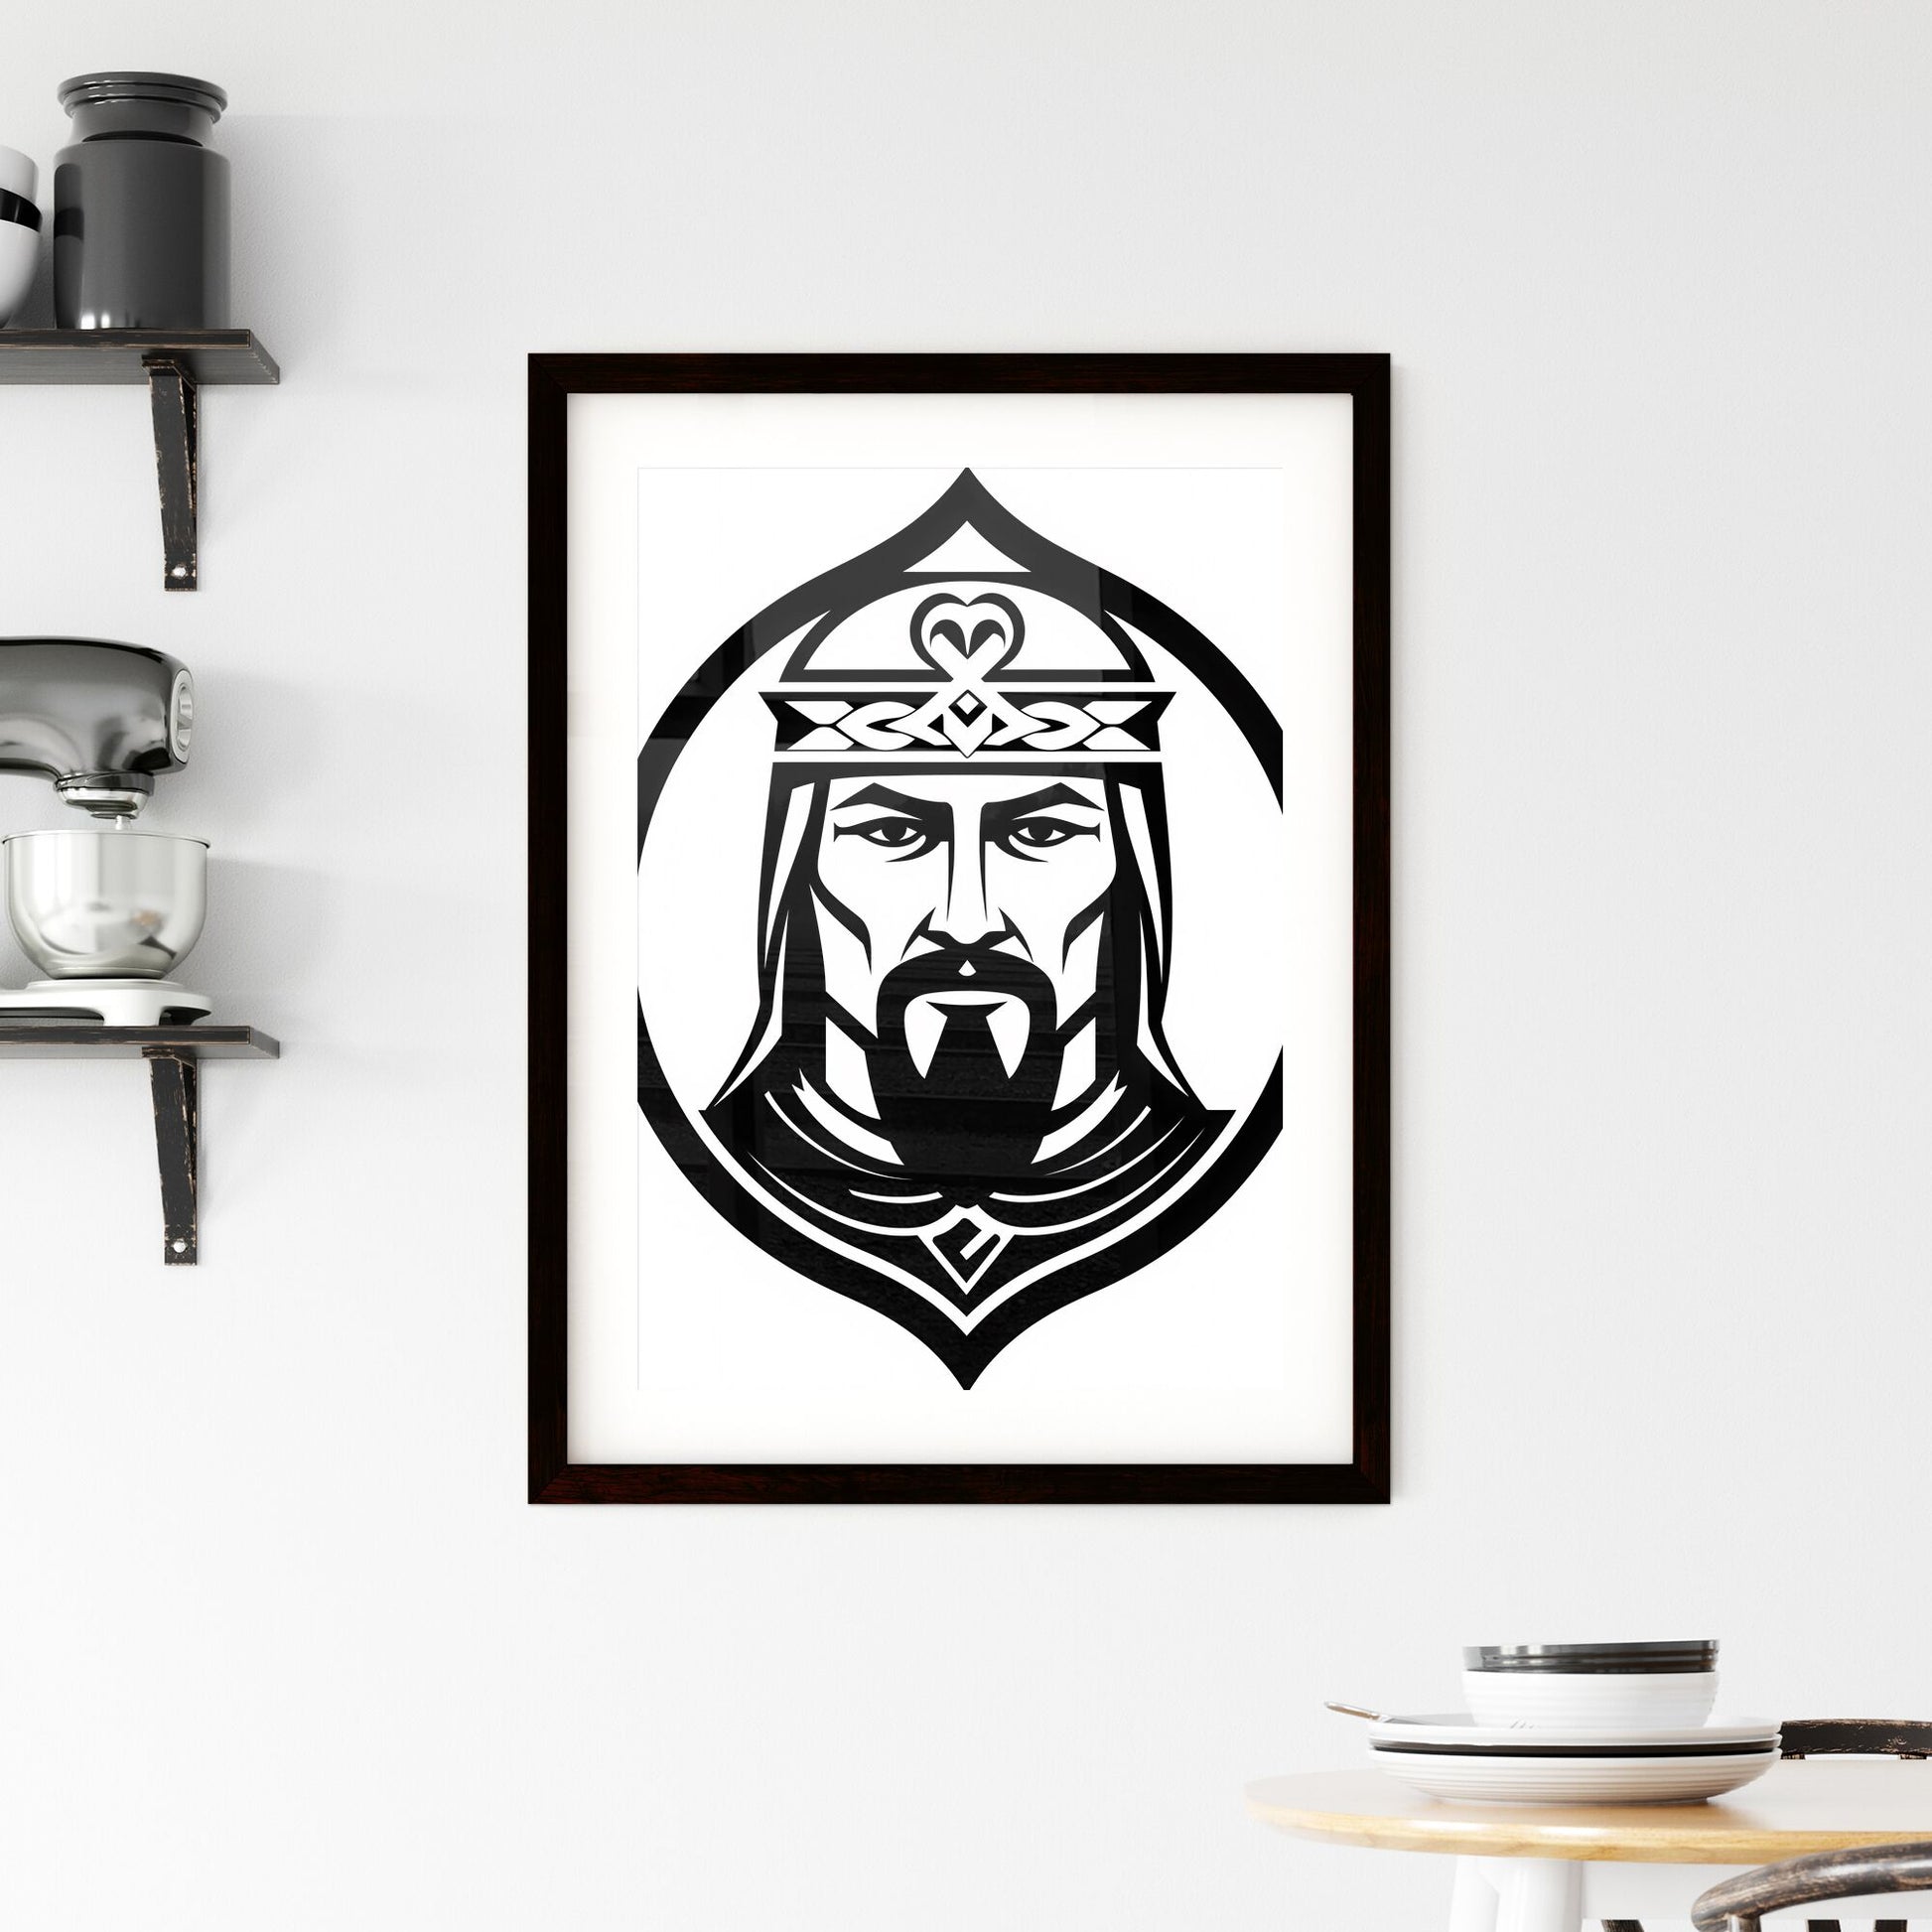 Vibrant Black and White Line Art King Mascot Logo with Beard and Crown Default Title